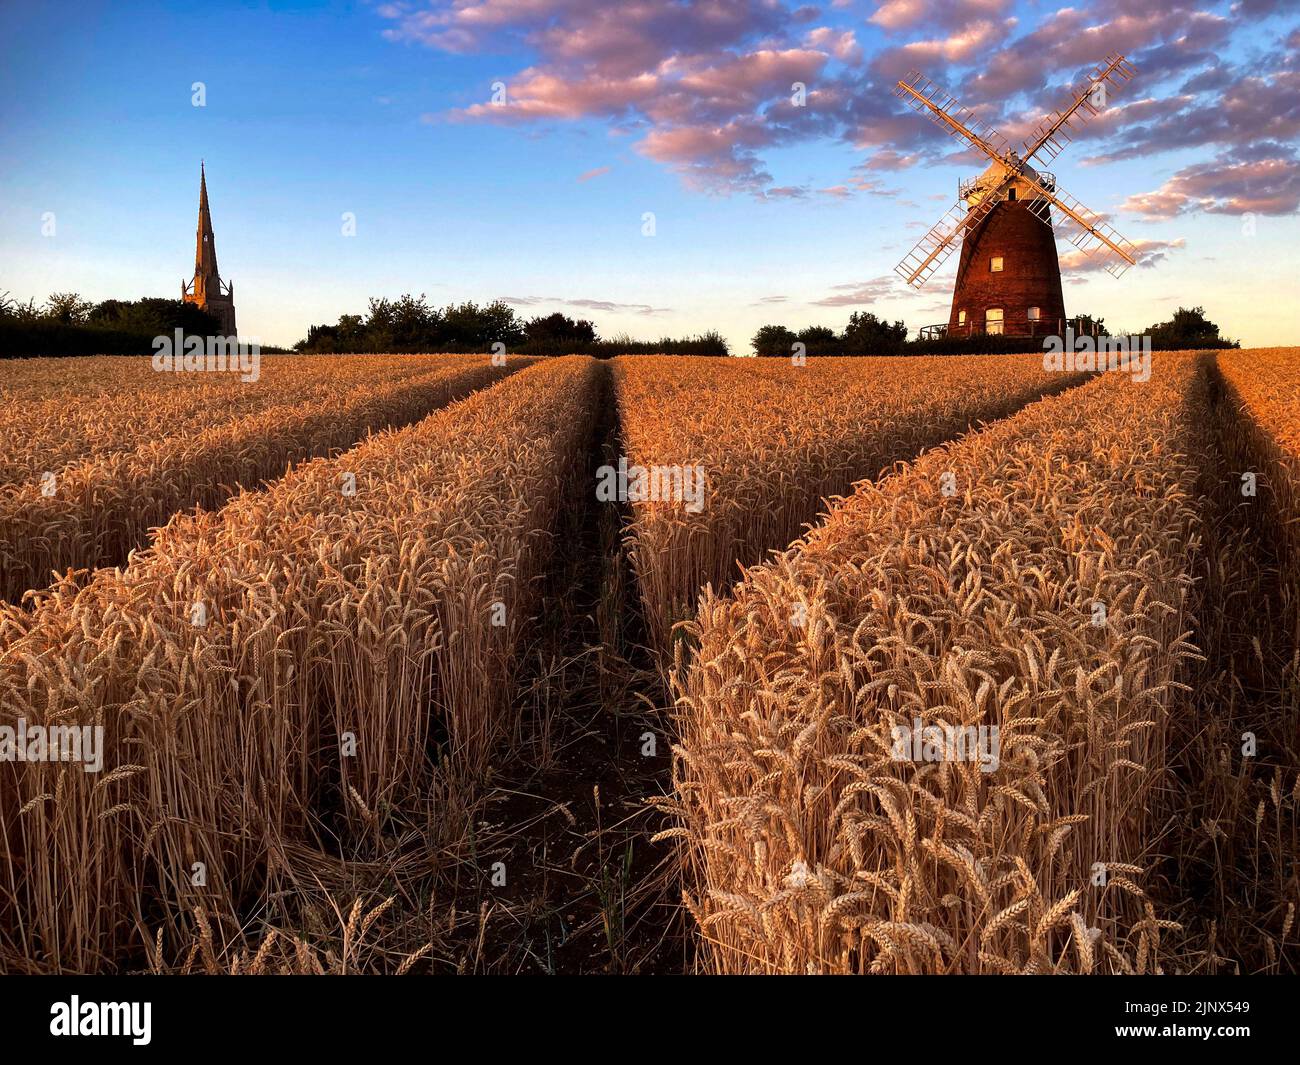 Thaxted Essex UK Wheat waiting for Harvest 31 July 2022 Wheat in the shadow of John Webbs 19th century Windmill in Thaxted north west Essex catching the last of the evening sunshine waiting to be harvested. Photograph by Brian Harris / Alamy News Stock Photo